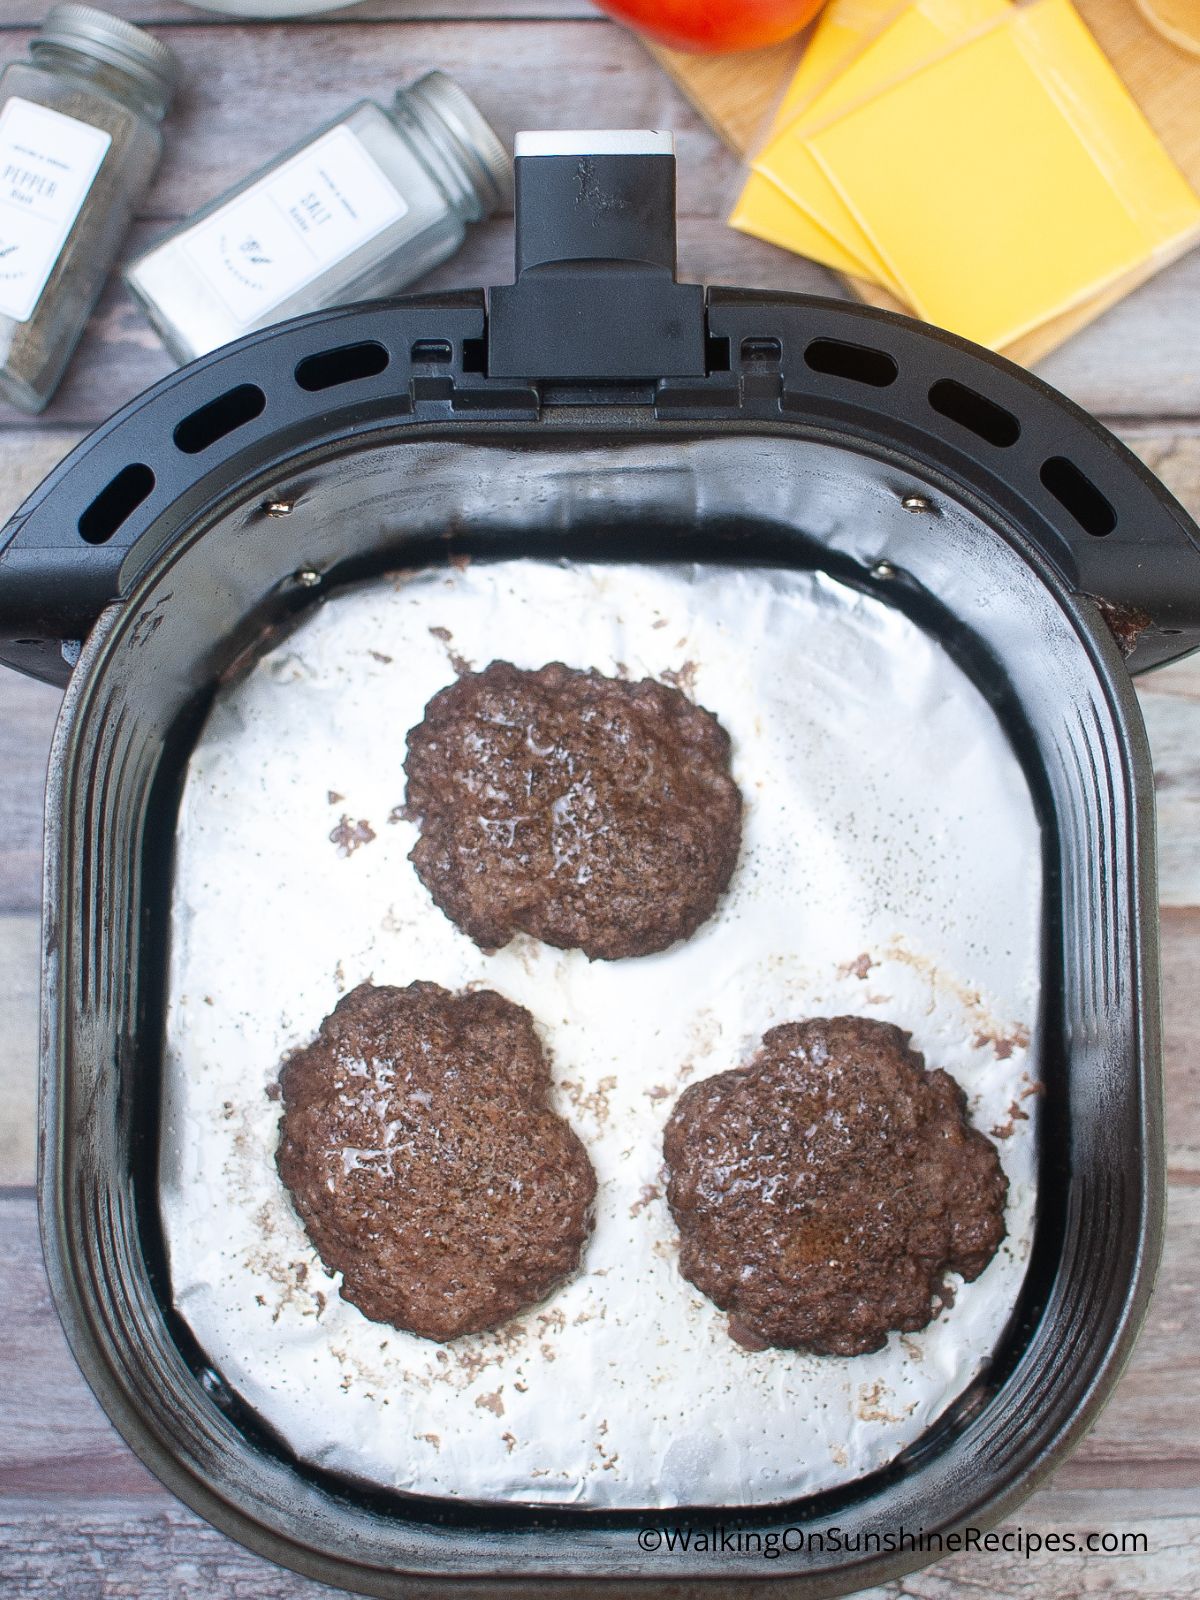 how to cook hamburgers in an air fryer.